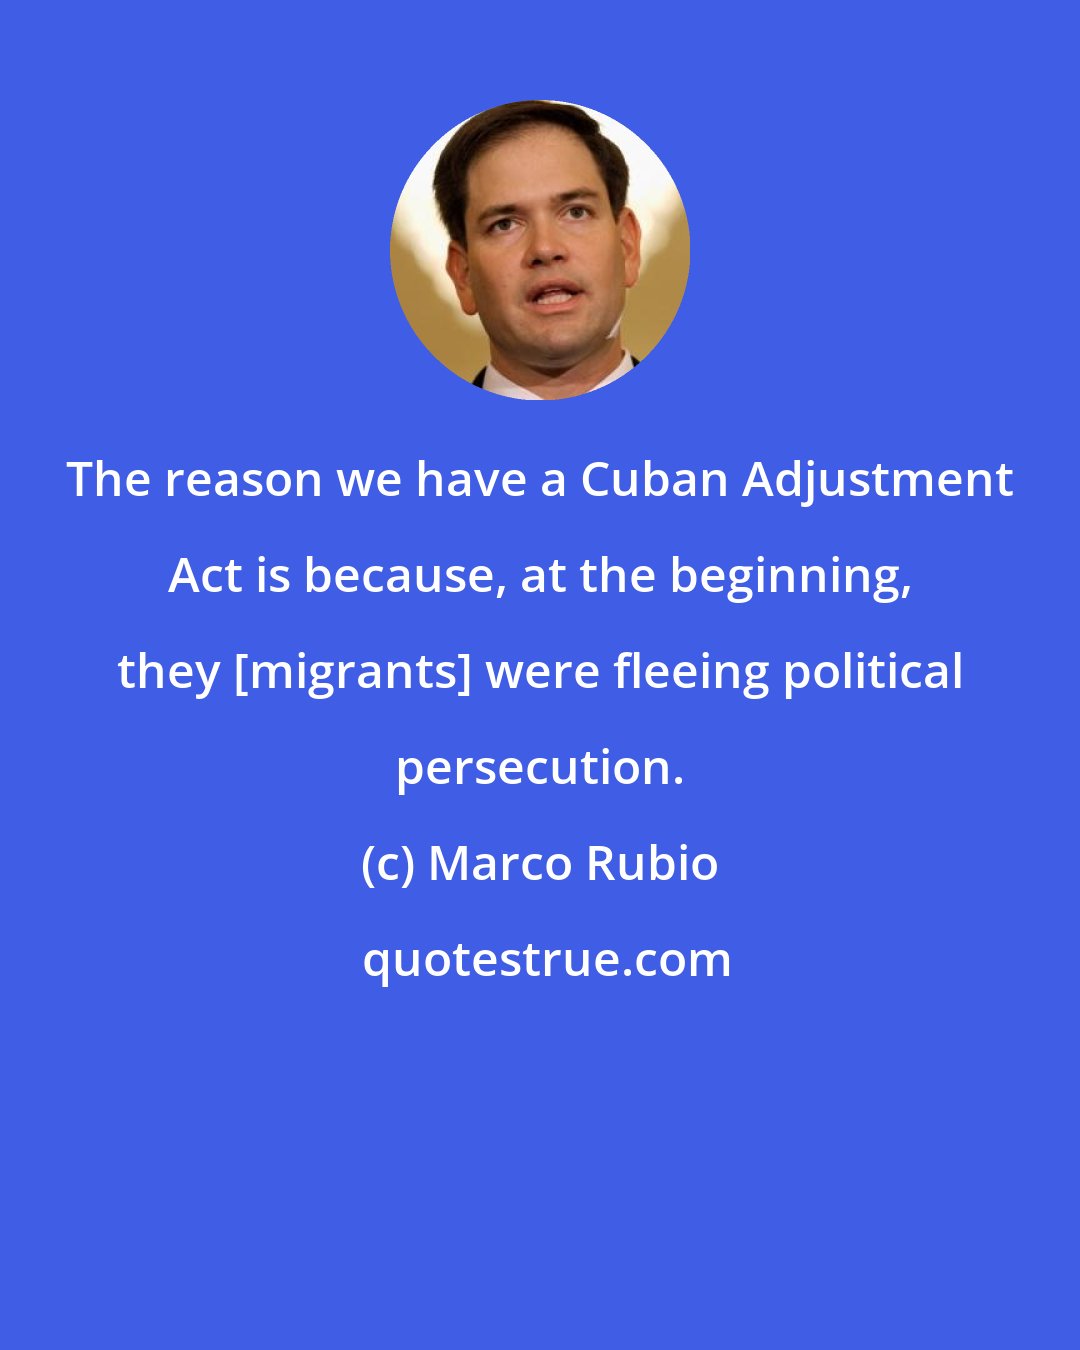 Marco Rubio: The reason we have a Cuban Adjustment Act is because, at the beginning, they [migrants] were fleeing political persecution.